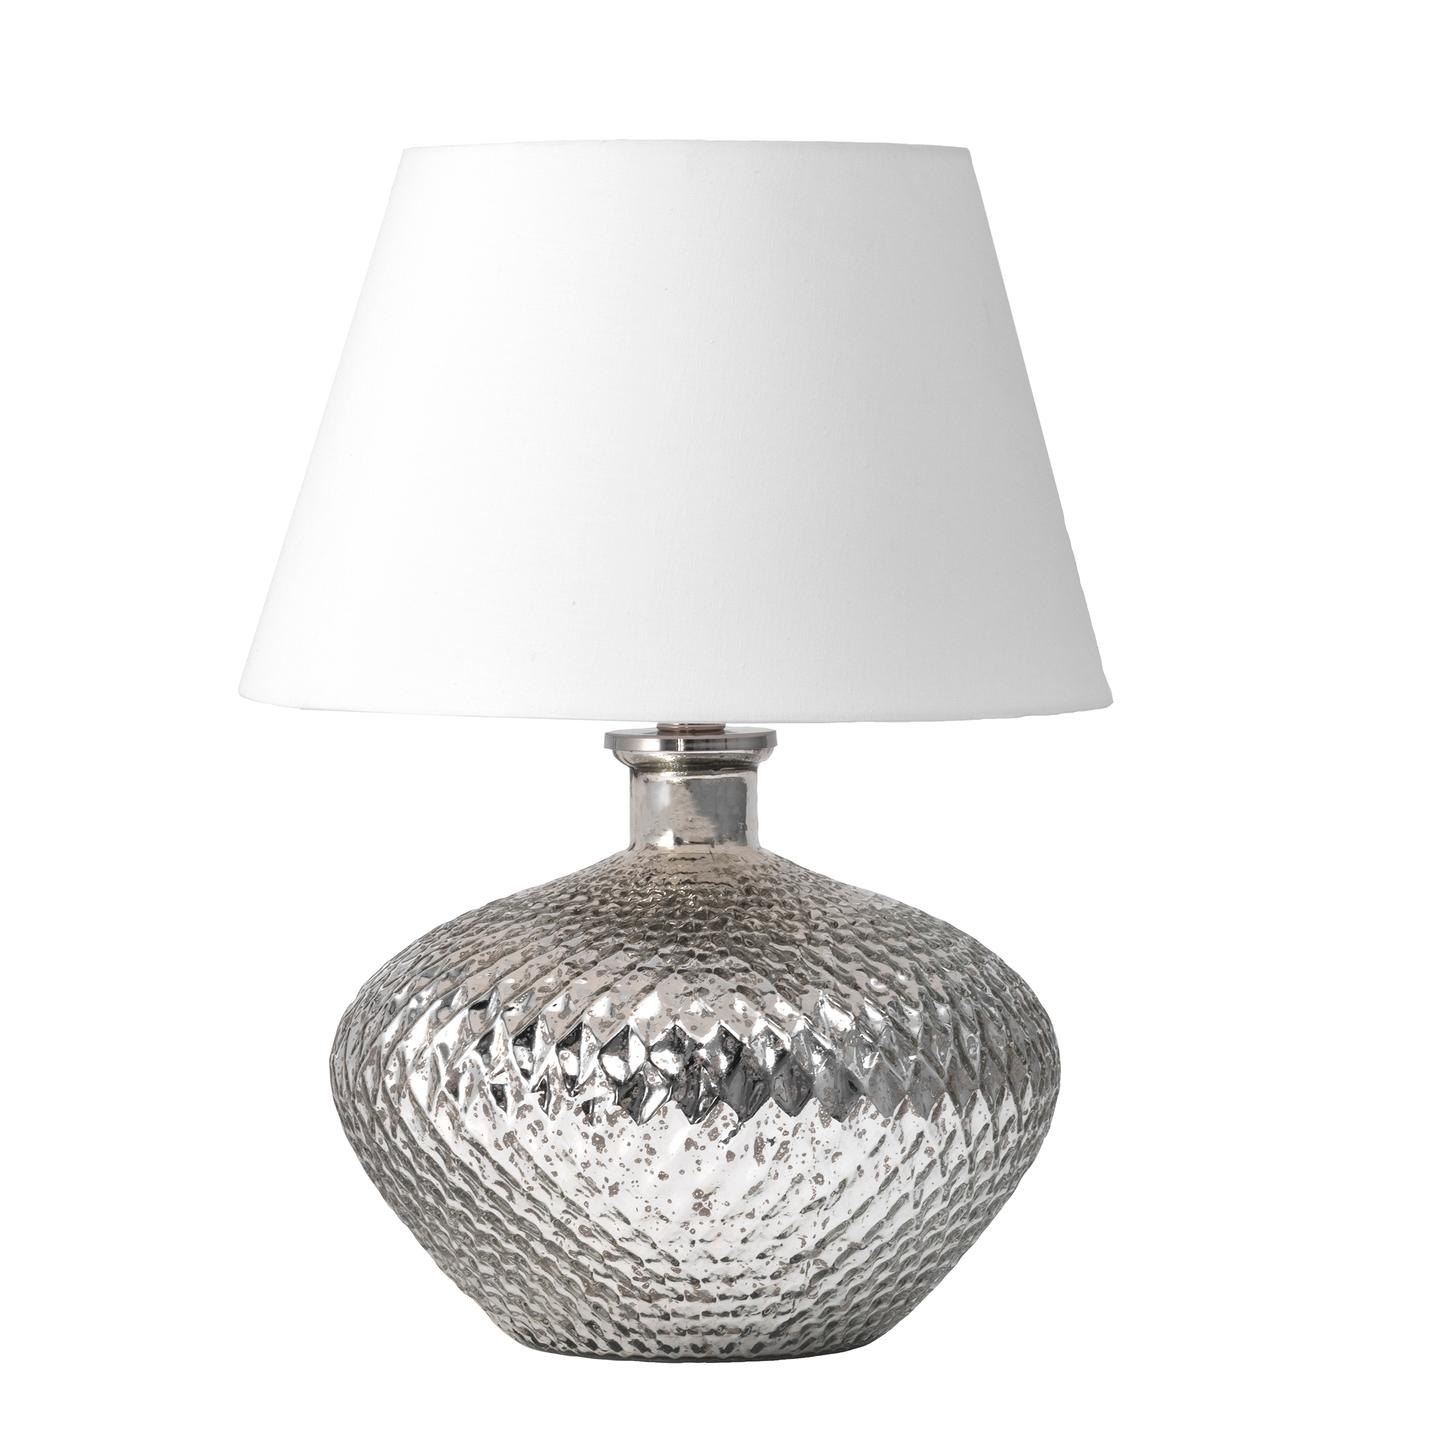 Alhambra 19" Glass Table Lamp - Image 2